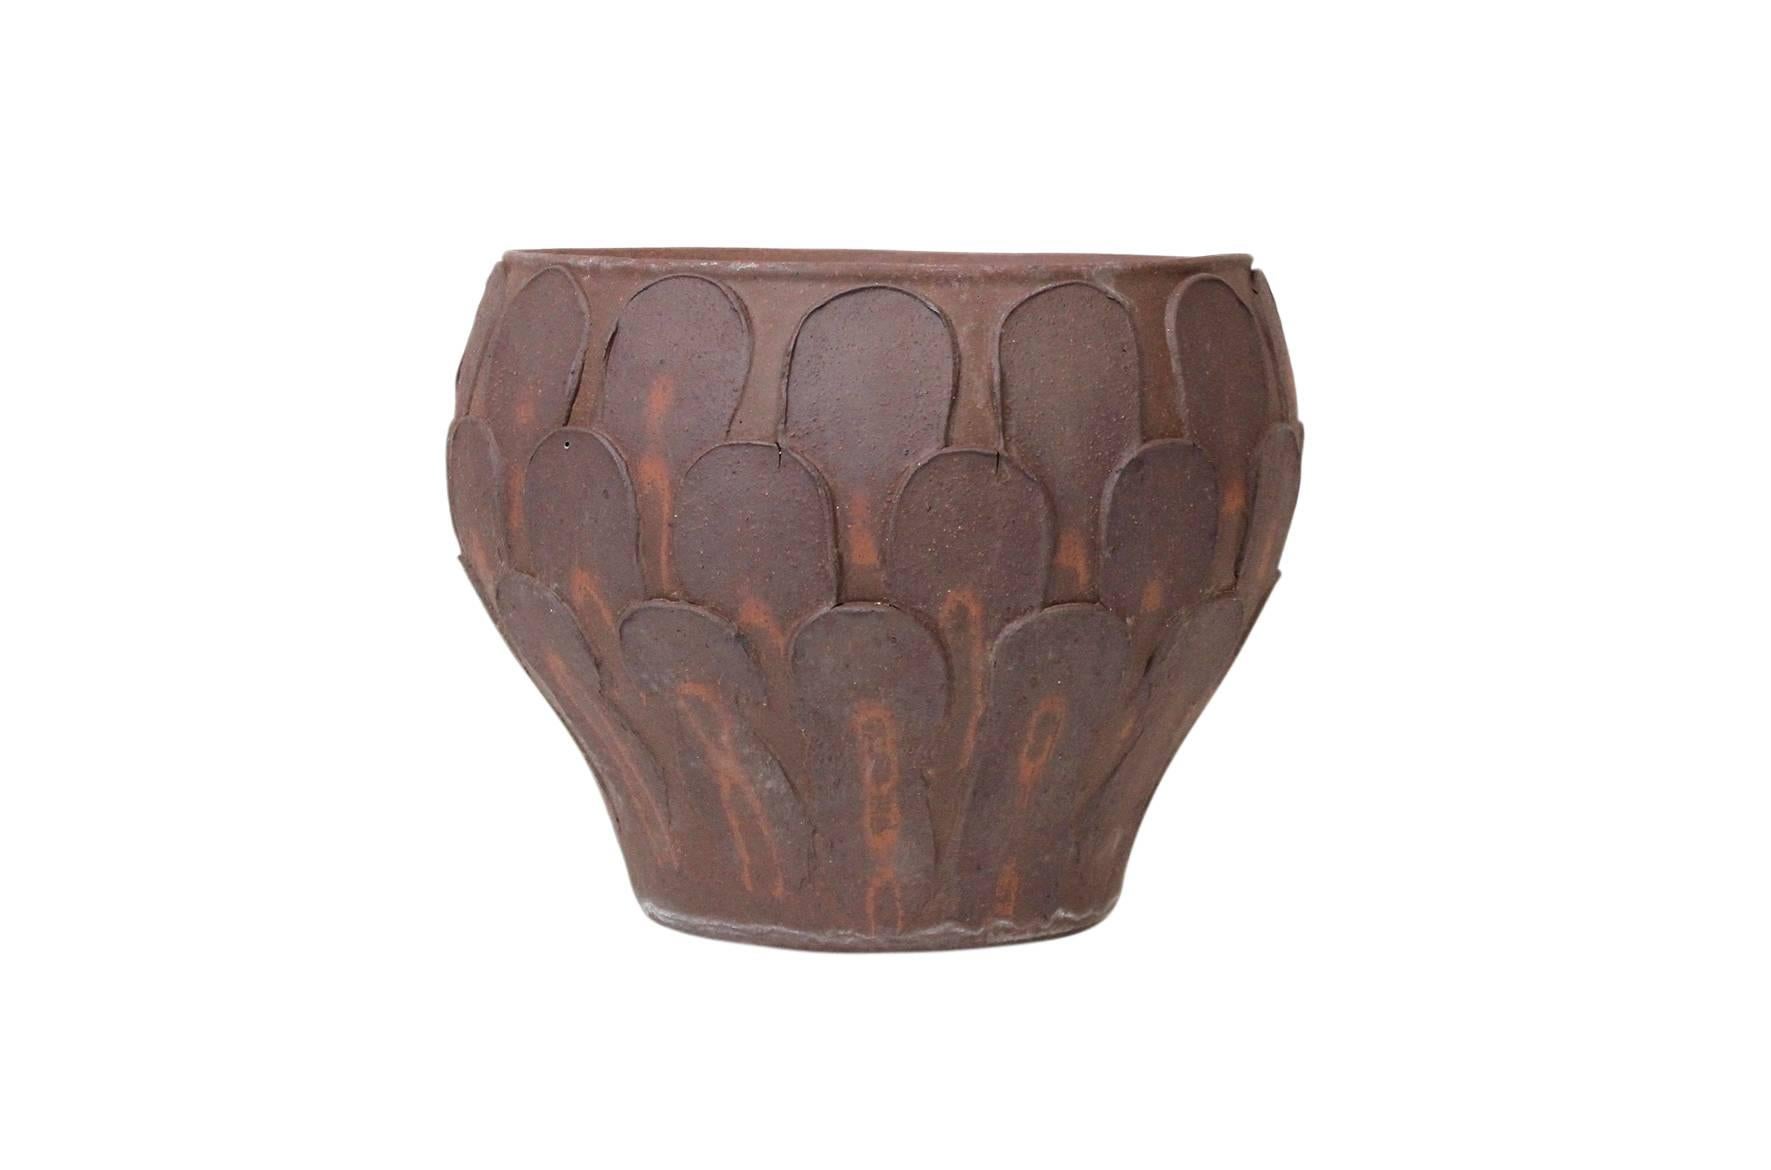 Iconic David Cressey planter for Architectural Pottery's Pro/Artisan series. Raw unglazed and carved surface.